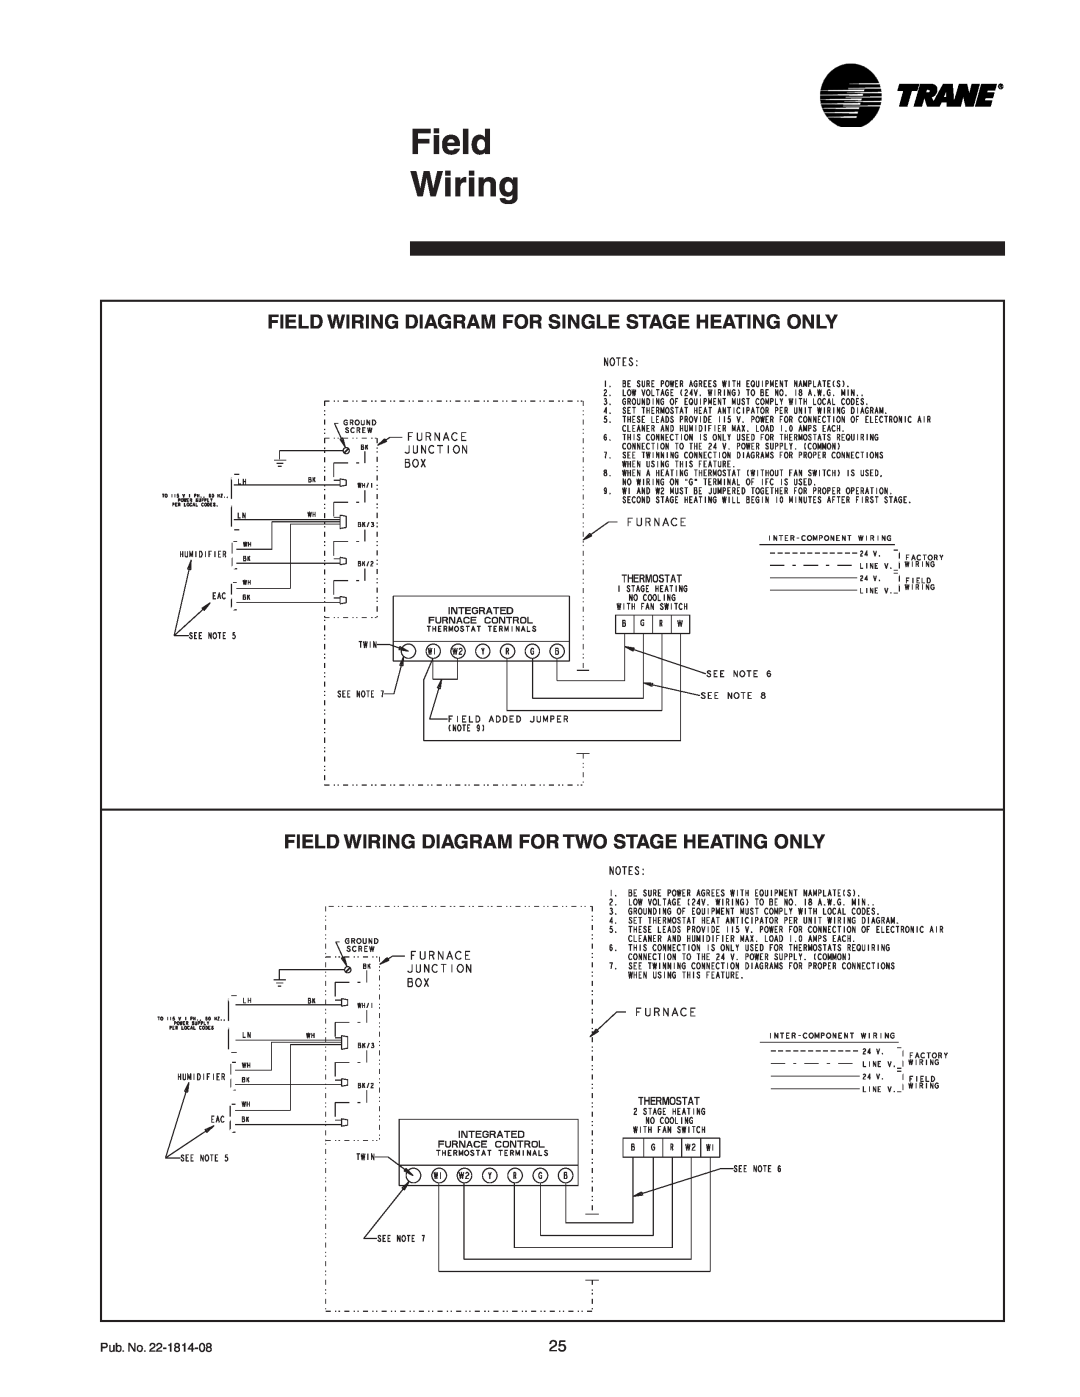 Trane TDH2C100A9V4VA, TUH2C100A9V5VA, TUH2C100A9V4VA, TUH2B080A9V3VA Field Wiring Diagram For Two Stage Heating Only 